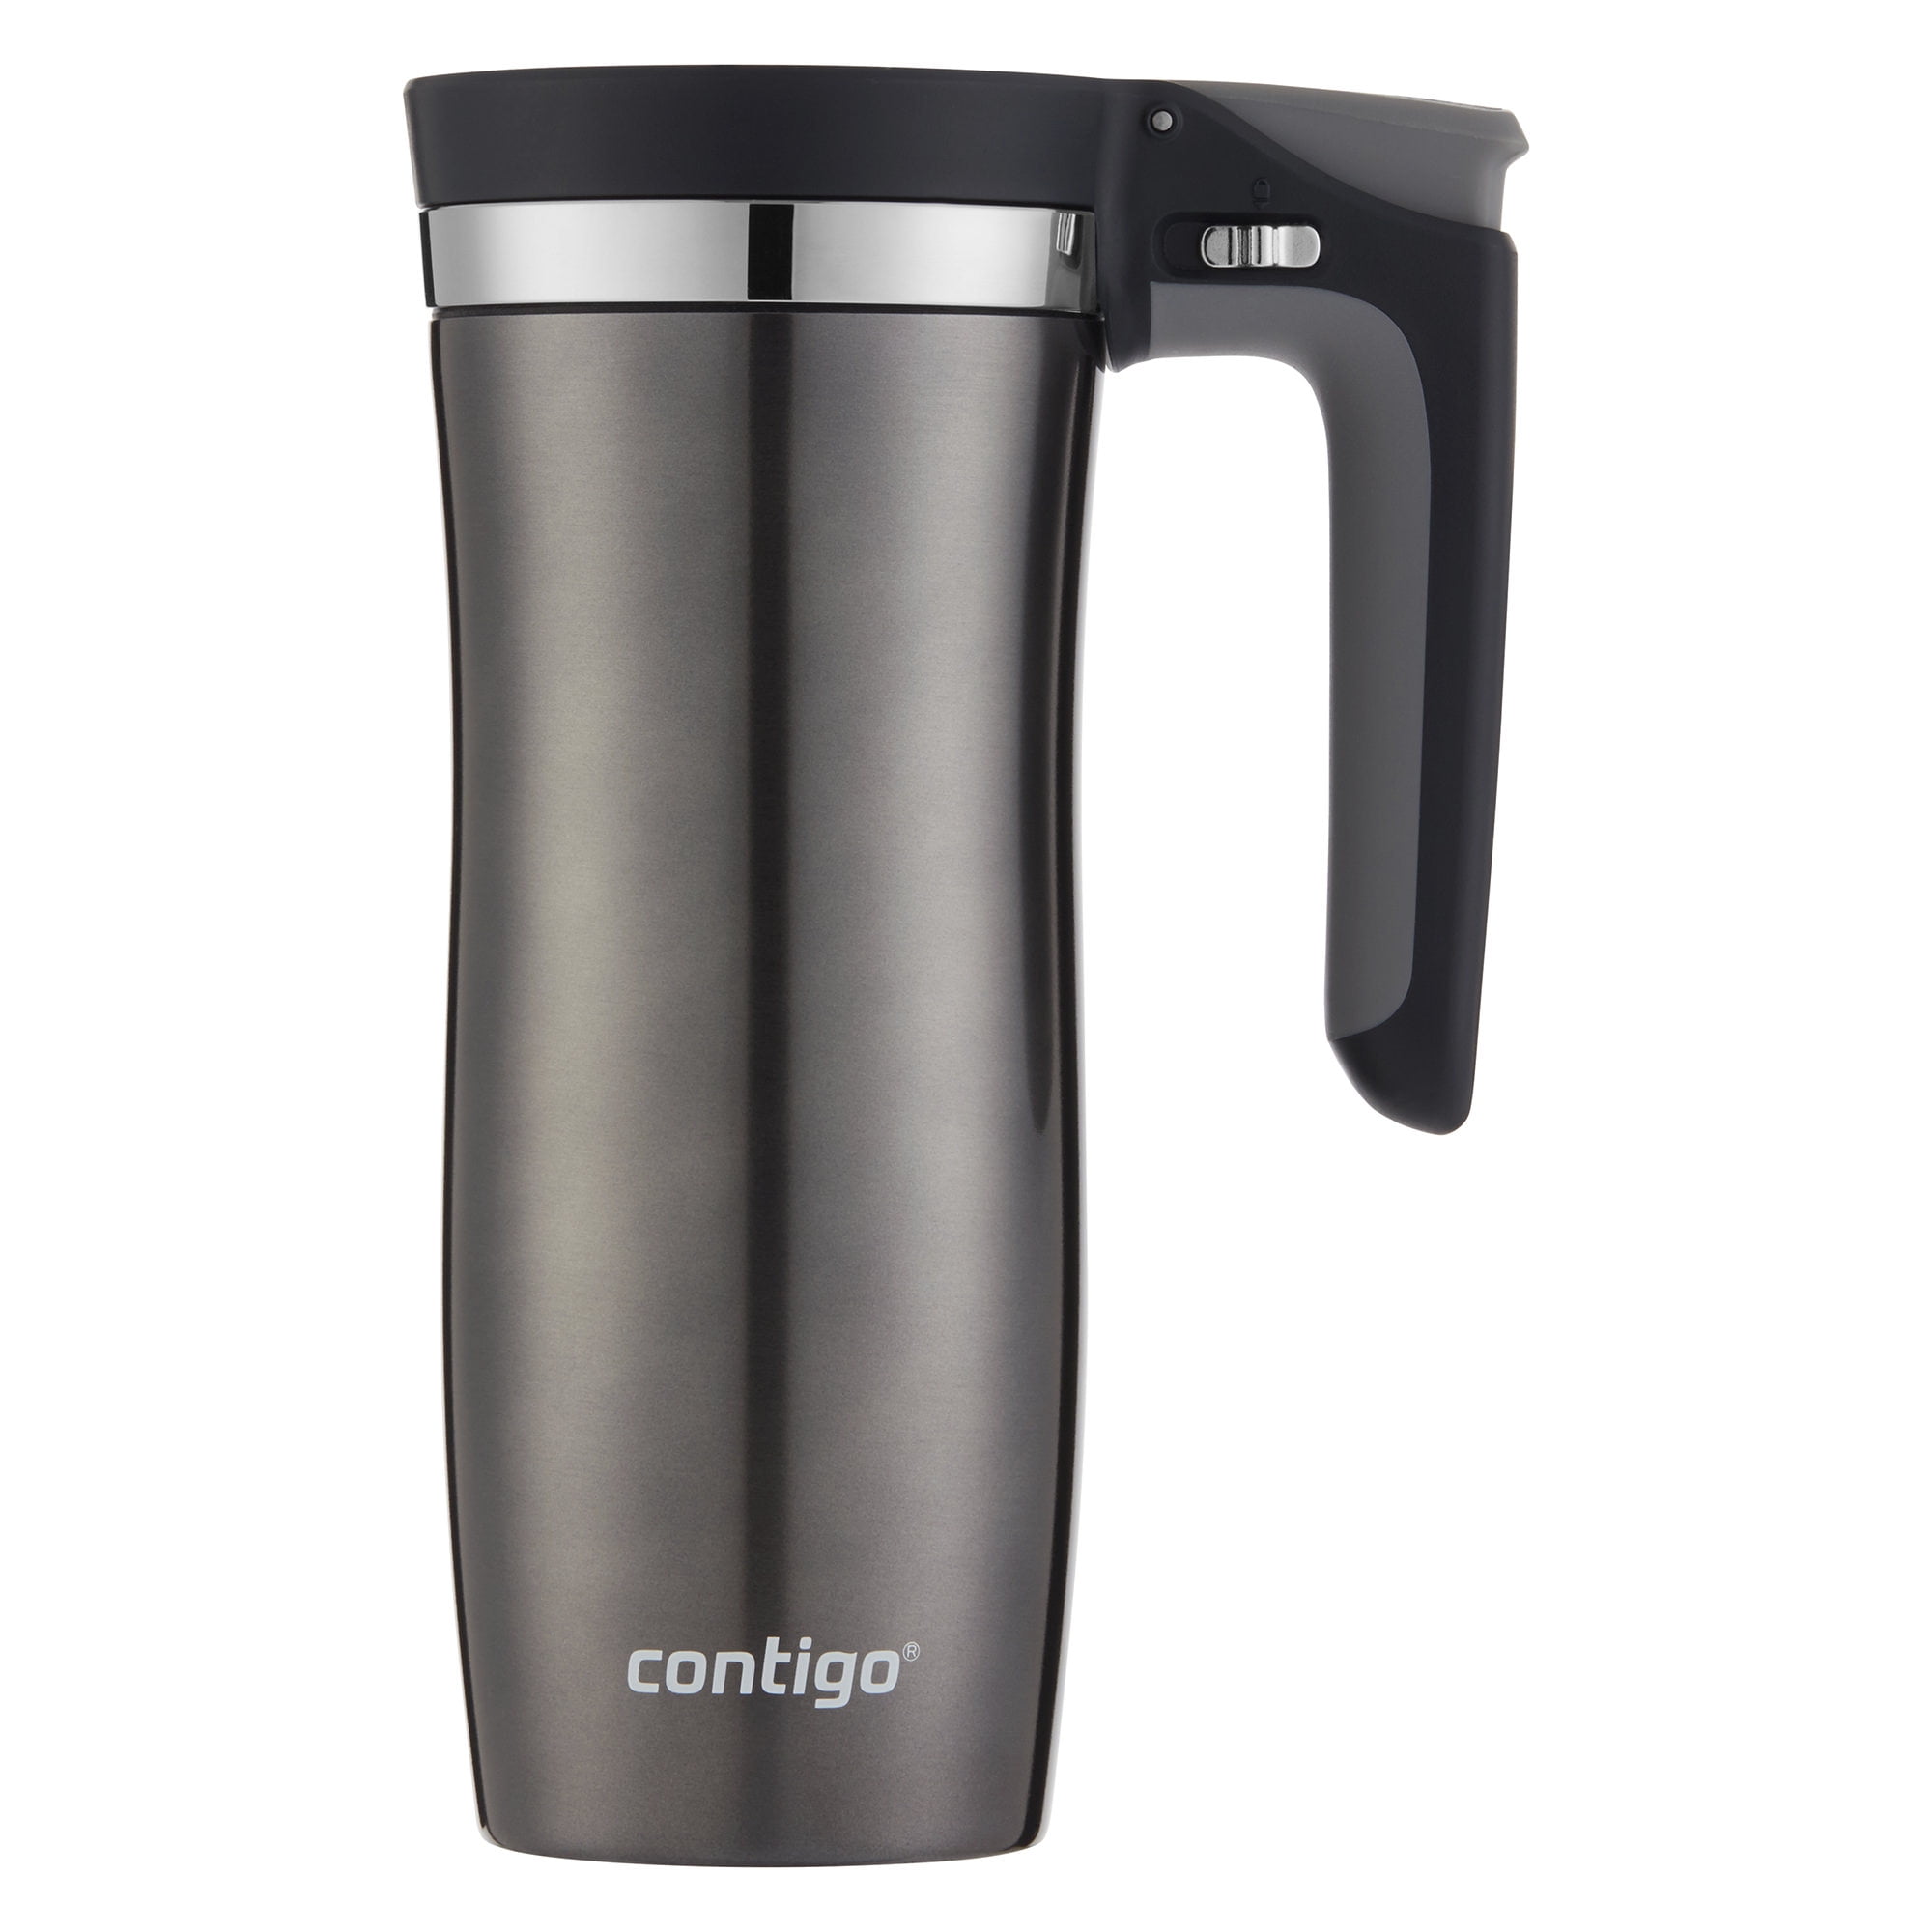  Contigo Luxe Autoseal Vacuum-Insulated Travel Mug  Spill-Proof Coffee  Mug with Stainless Steel Thermalock Double-Wall Insulation, 16 oz., Biscay  Bay : Home & Kitchen